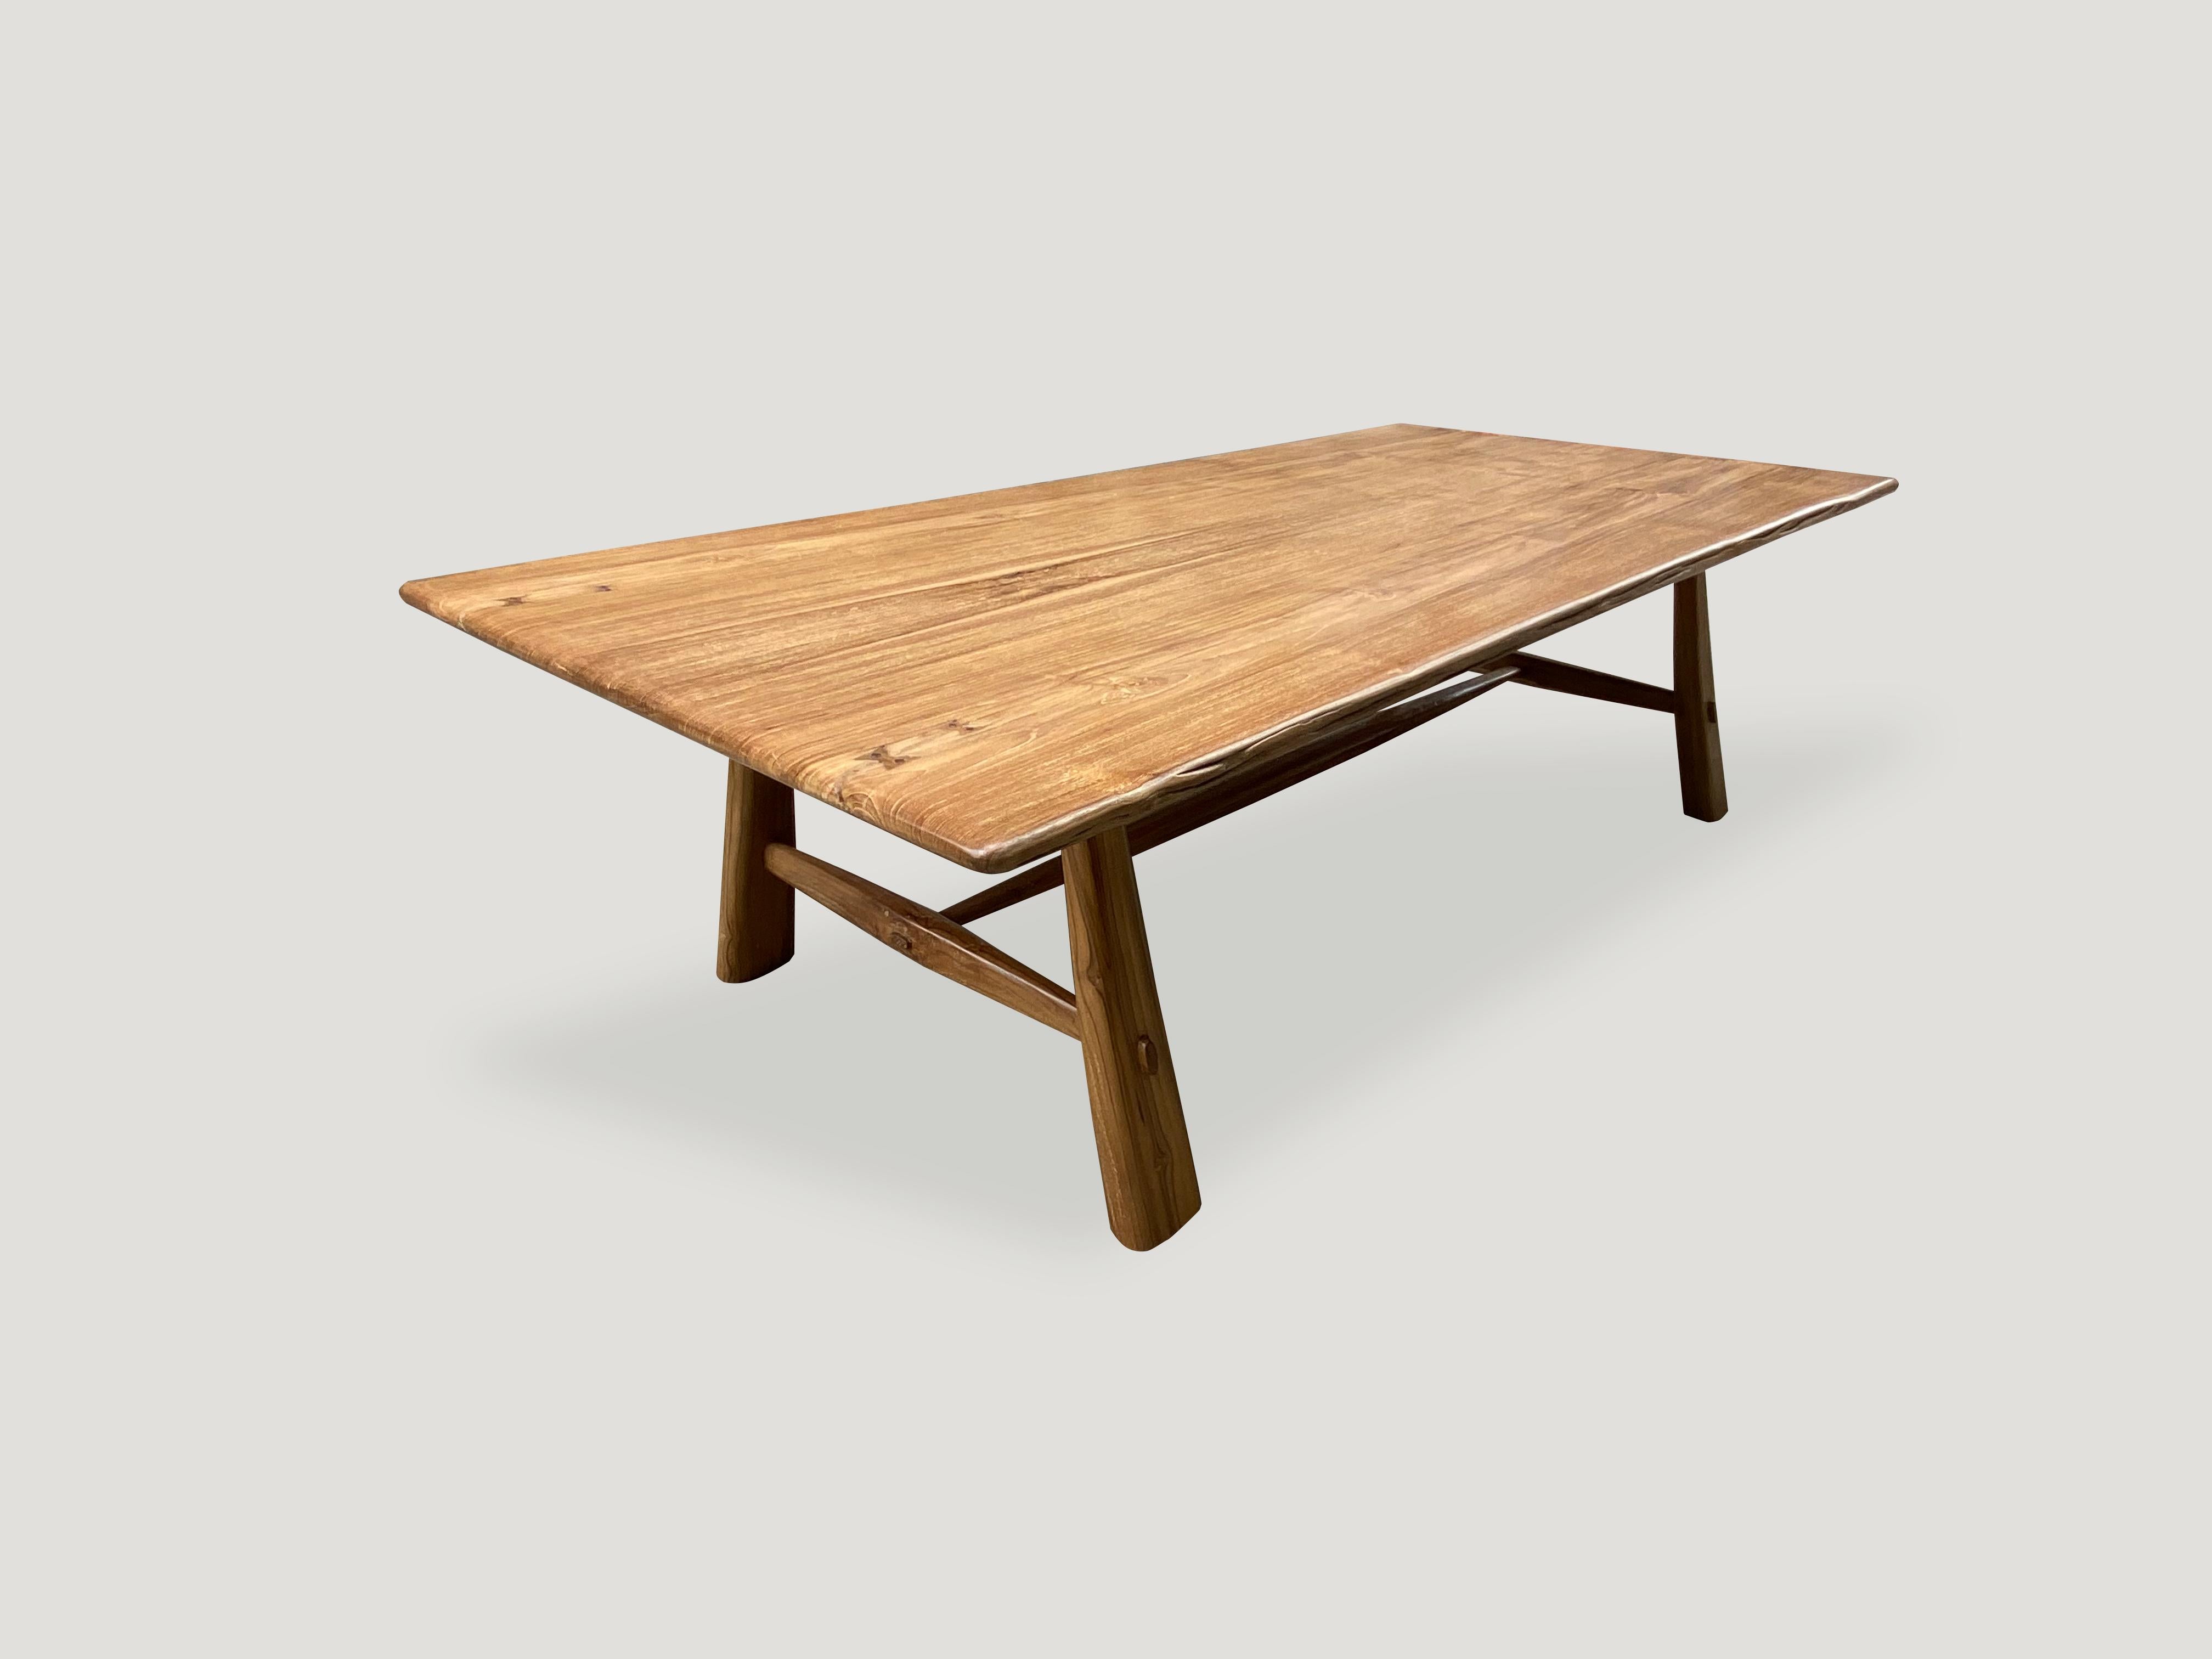 Andrianna Shamaris Midcentury Couture Teak Wood Dining Table For Sale 6